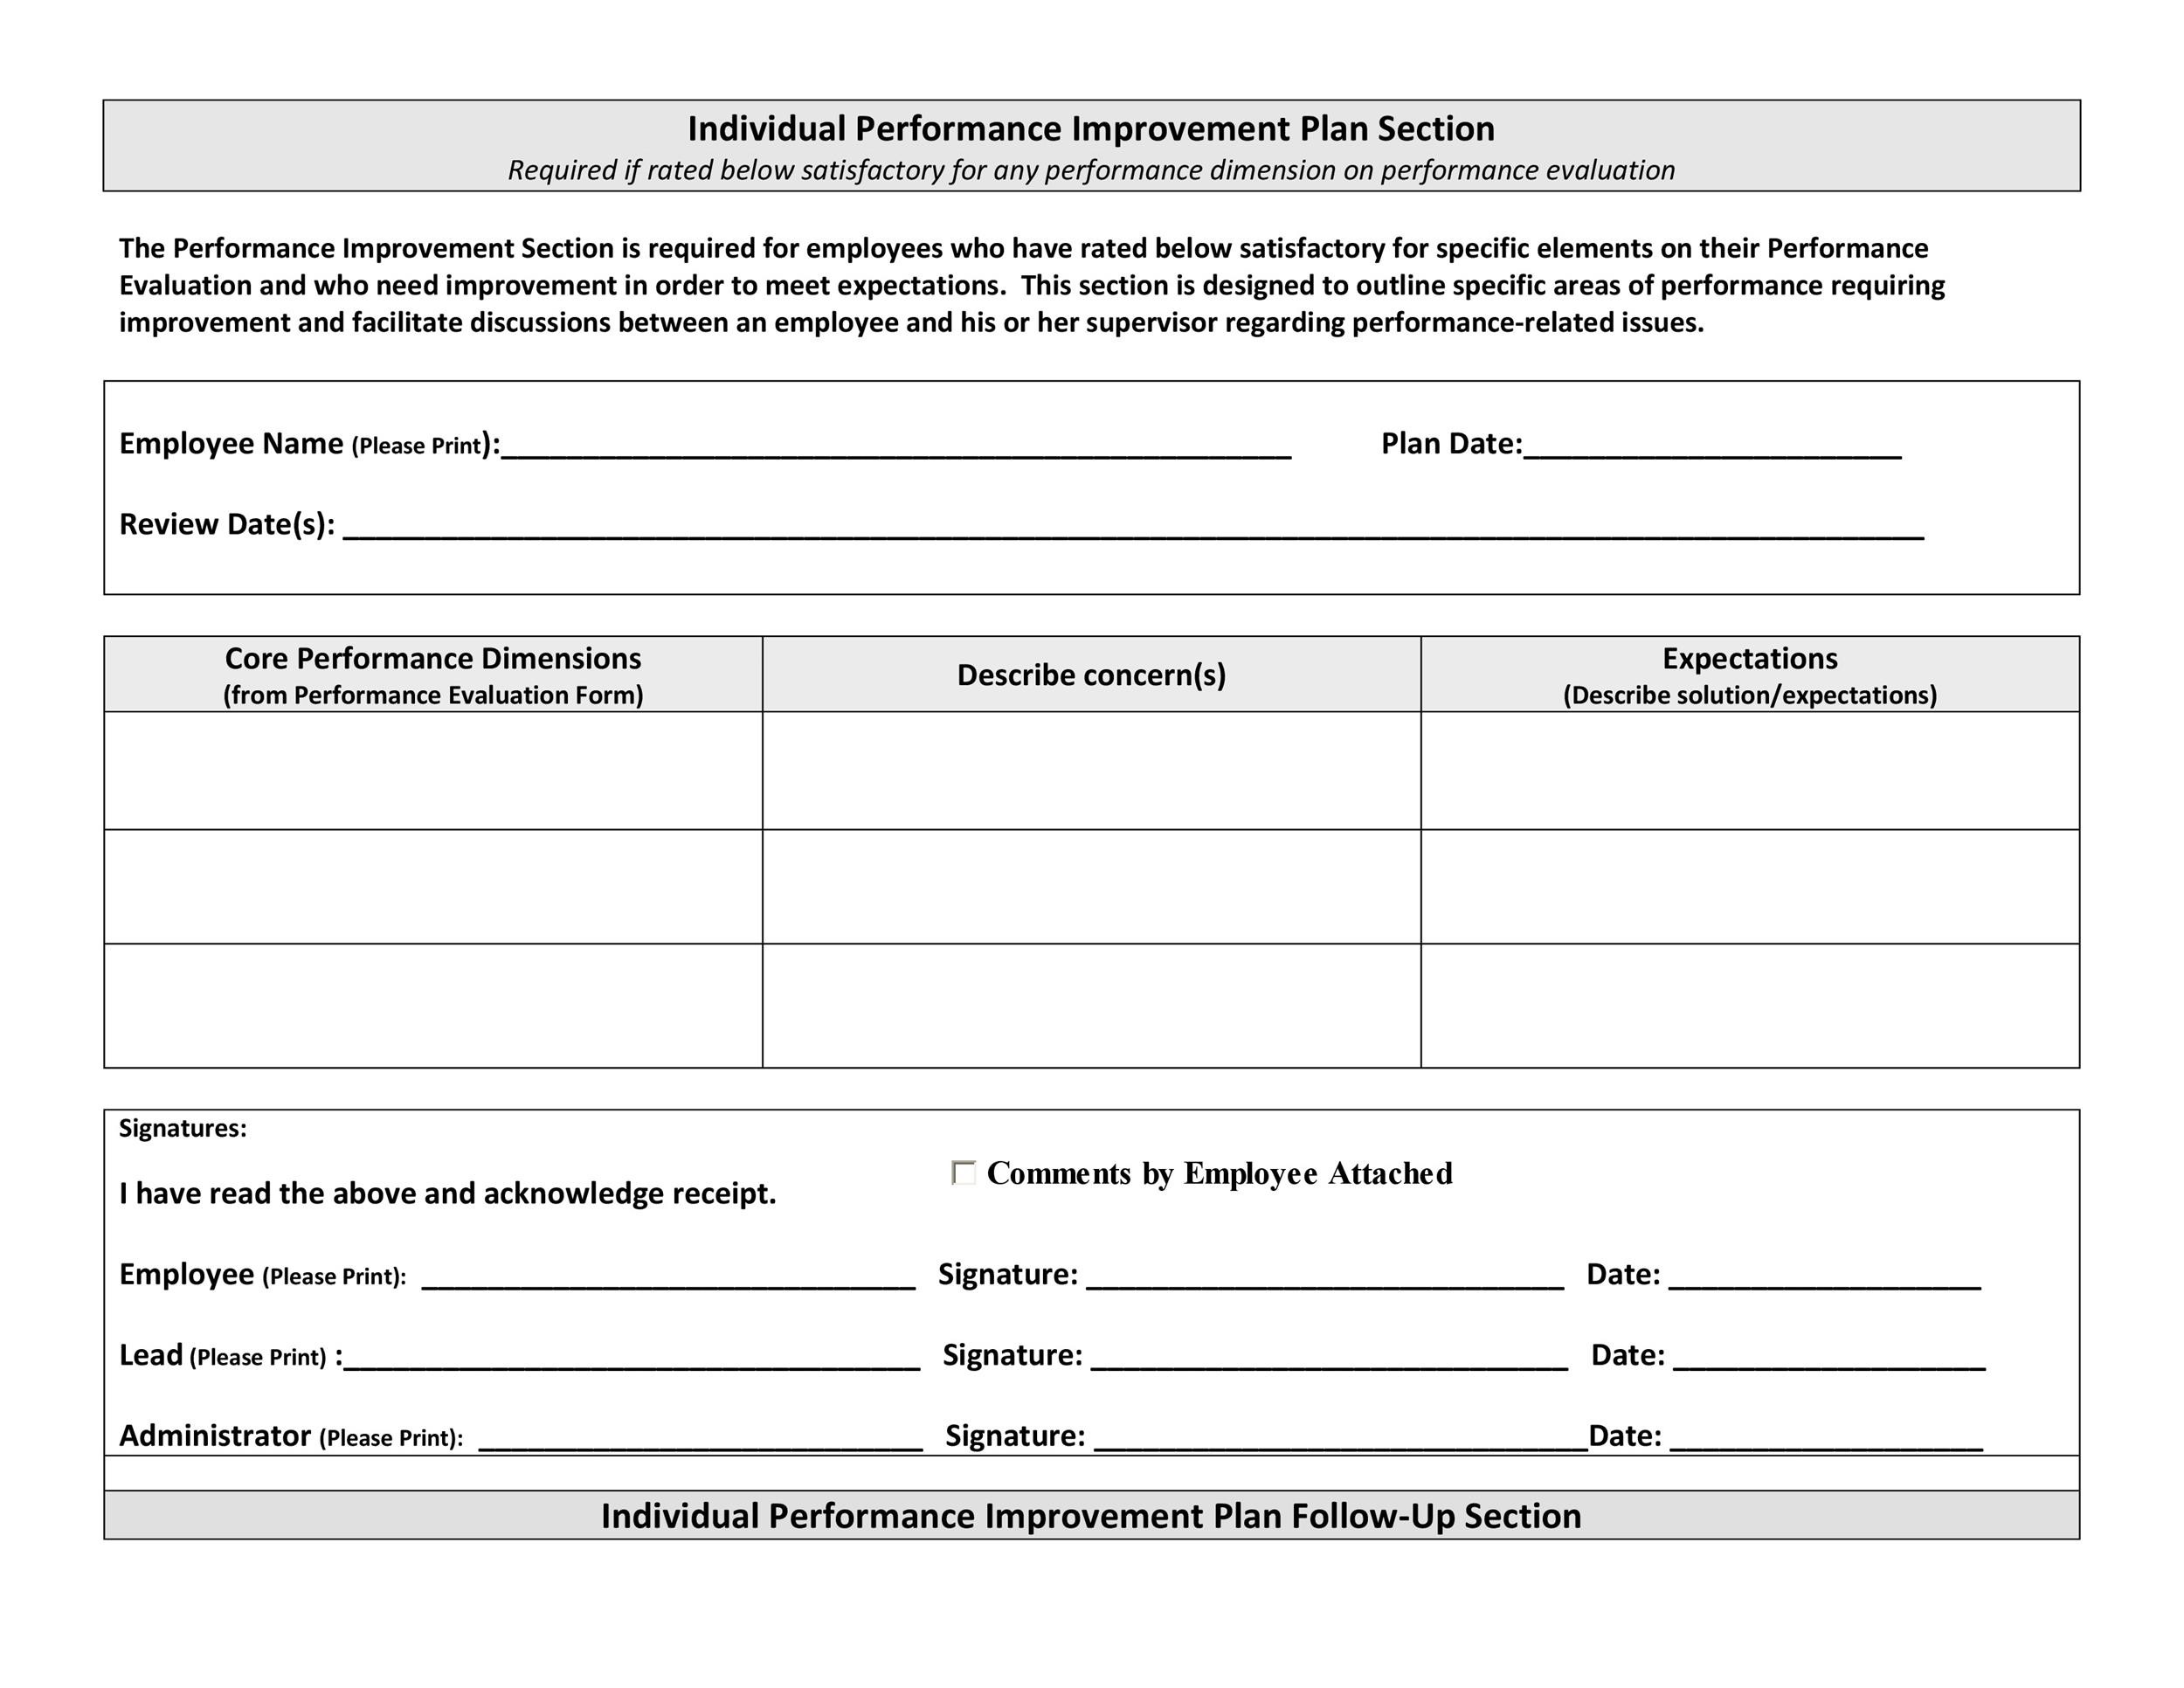 40 Performance Improvement Plan Templates And Examples 6556